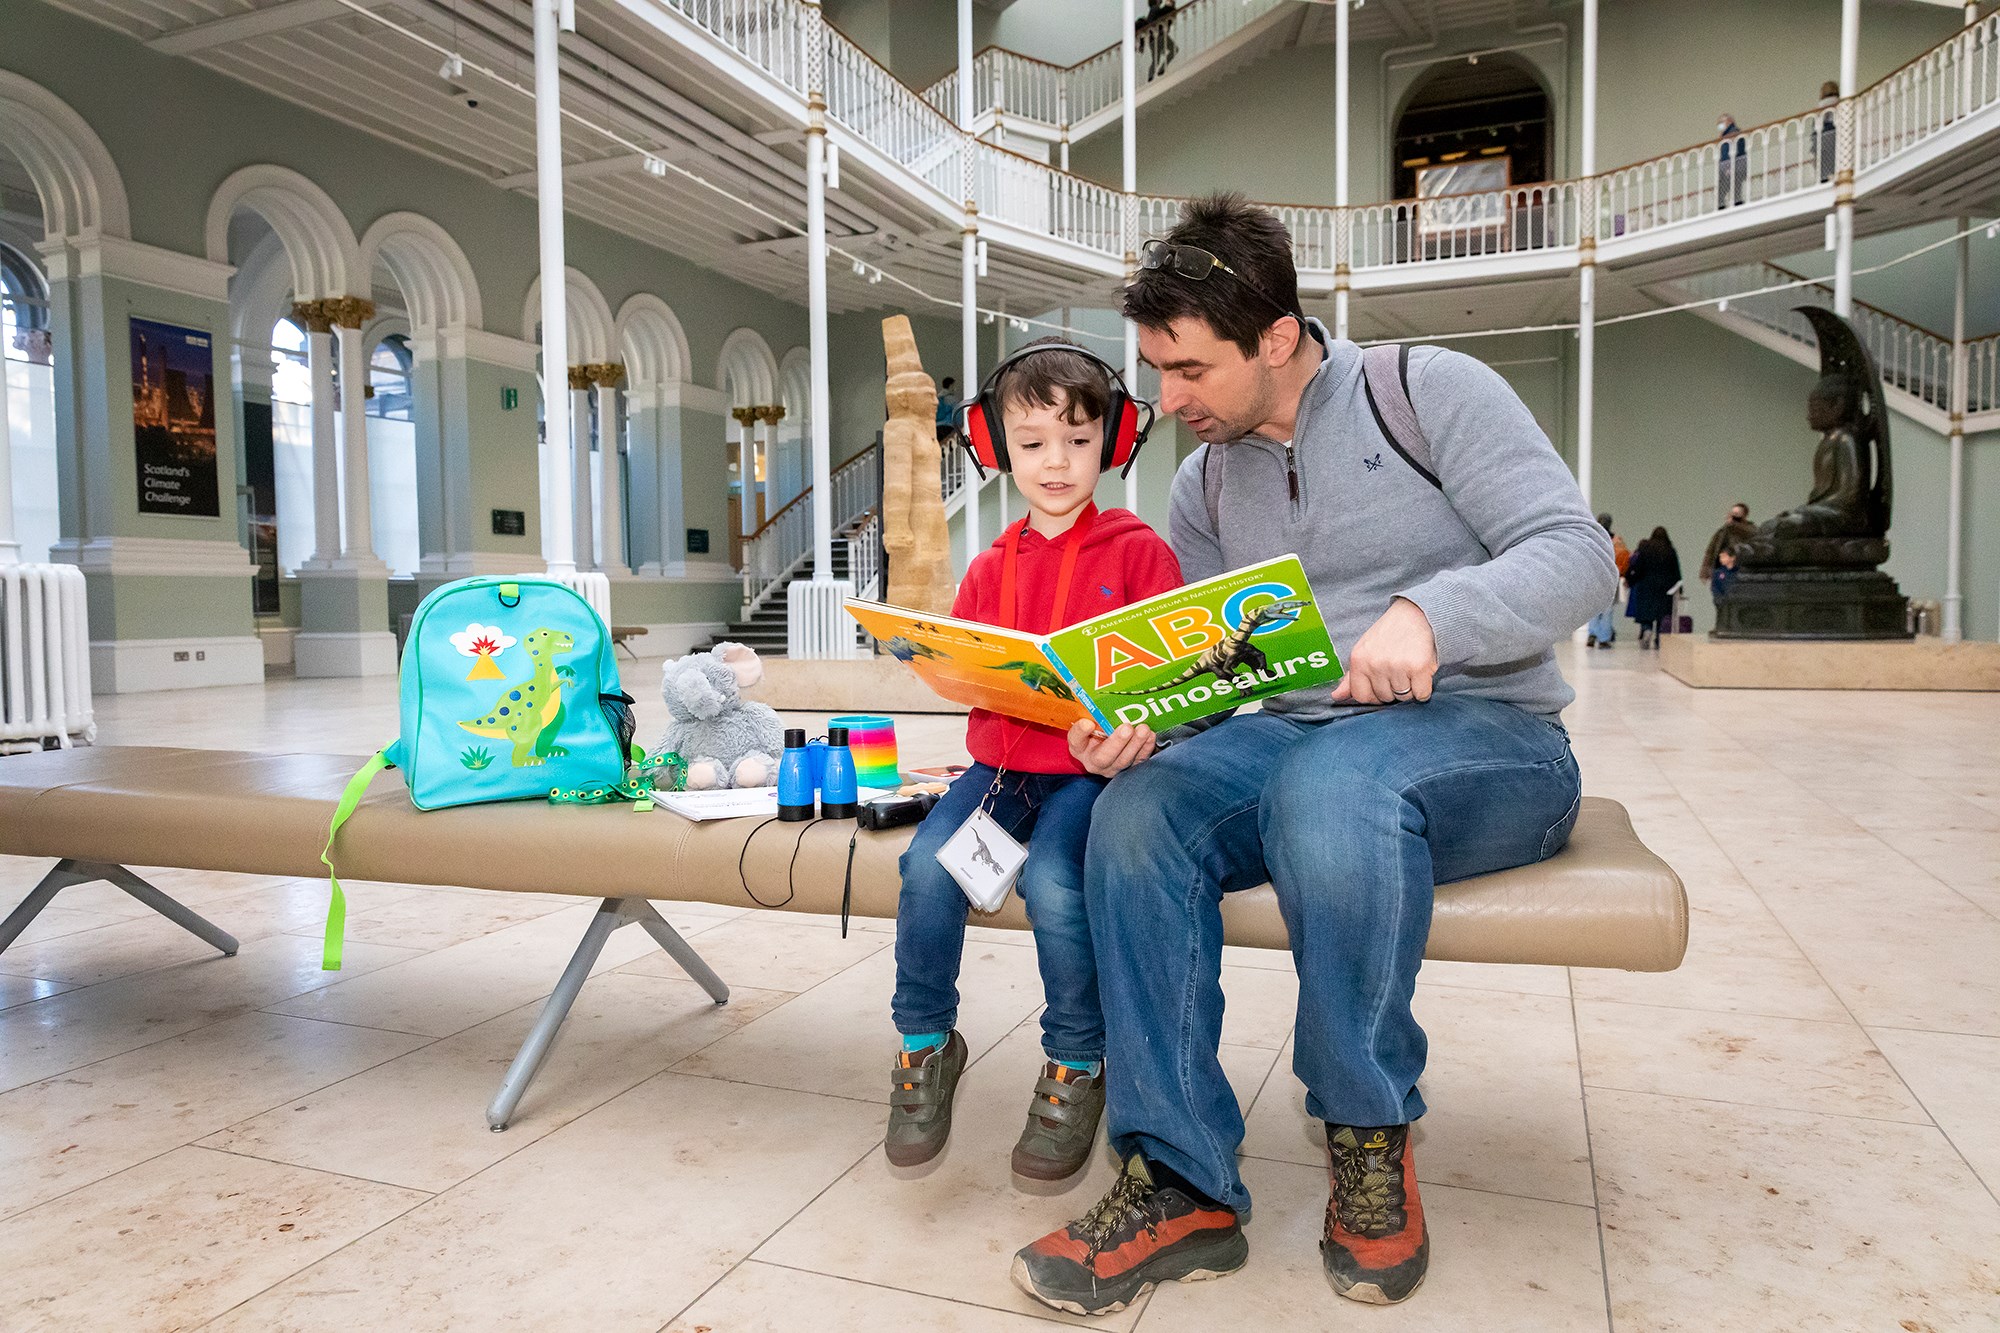 A man and a boy sit on a bench in the grand gallery looking at a large dinosaur picture book. The boy is wearing ear protectors.